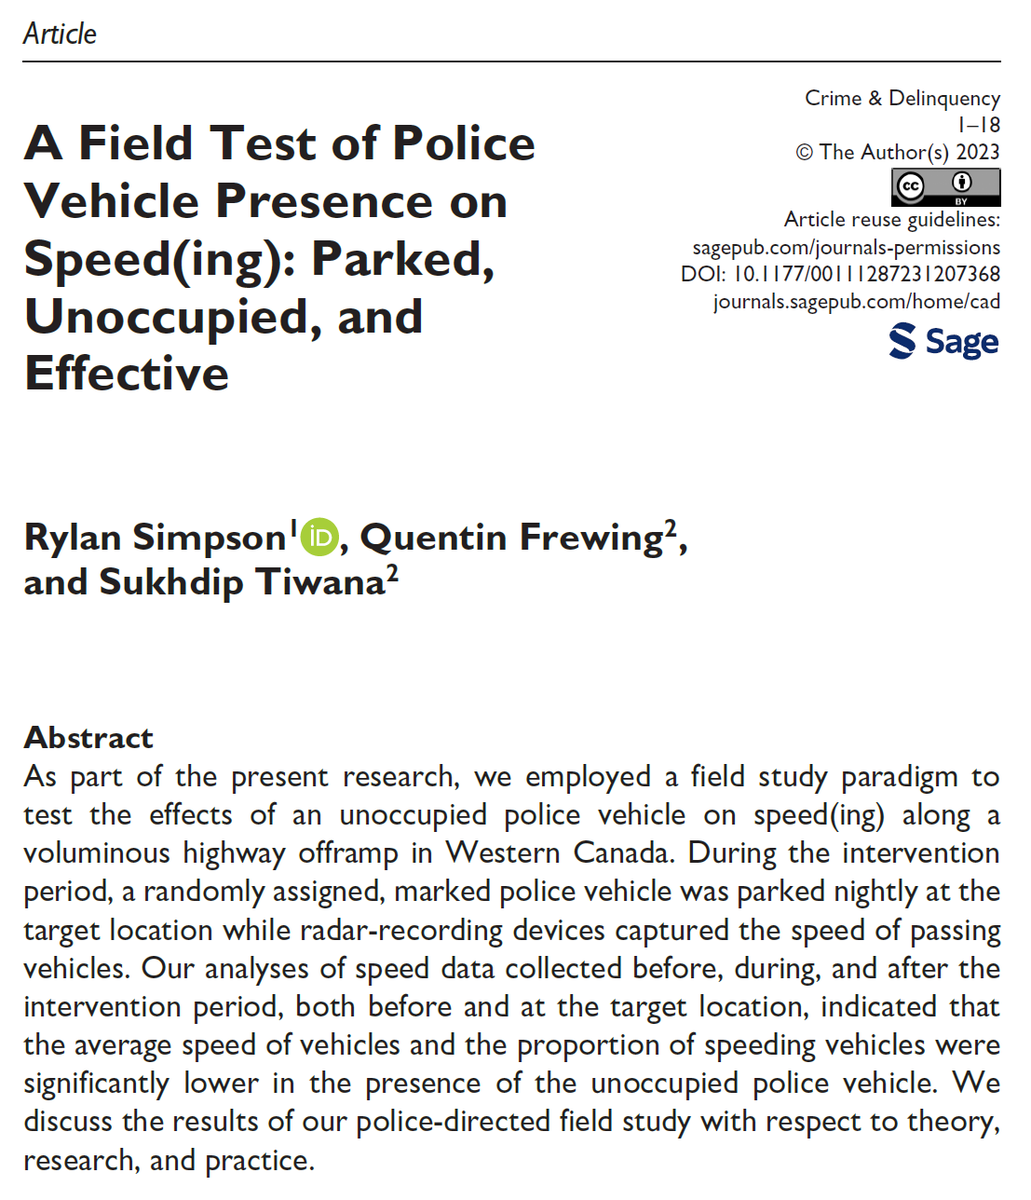 Speed(ing) = contributor to traffic collisions… ↑ risk & ↑ injuries! So how can #police reduce speed(ing)? In new article, I worked w/ @BCHwyPatrol to test effects of PARKED, MARKED & UNOCCUPIED #police #car on speed(ing) along hwy offramp: doi.org/10.1177/001112… A 🧵 1/5